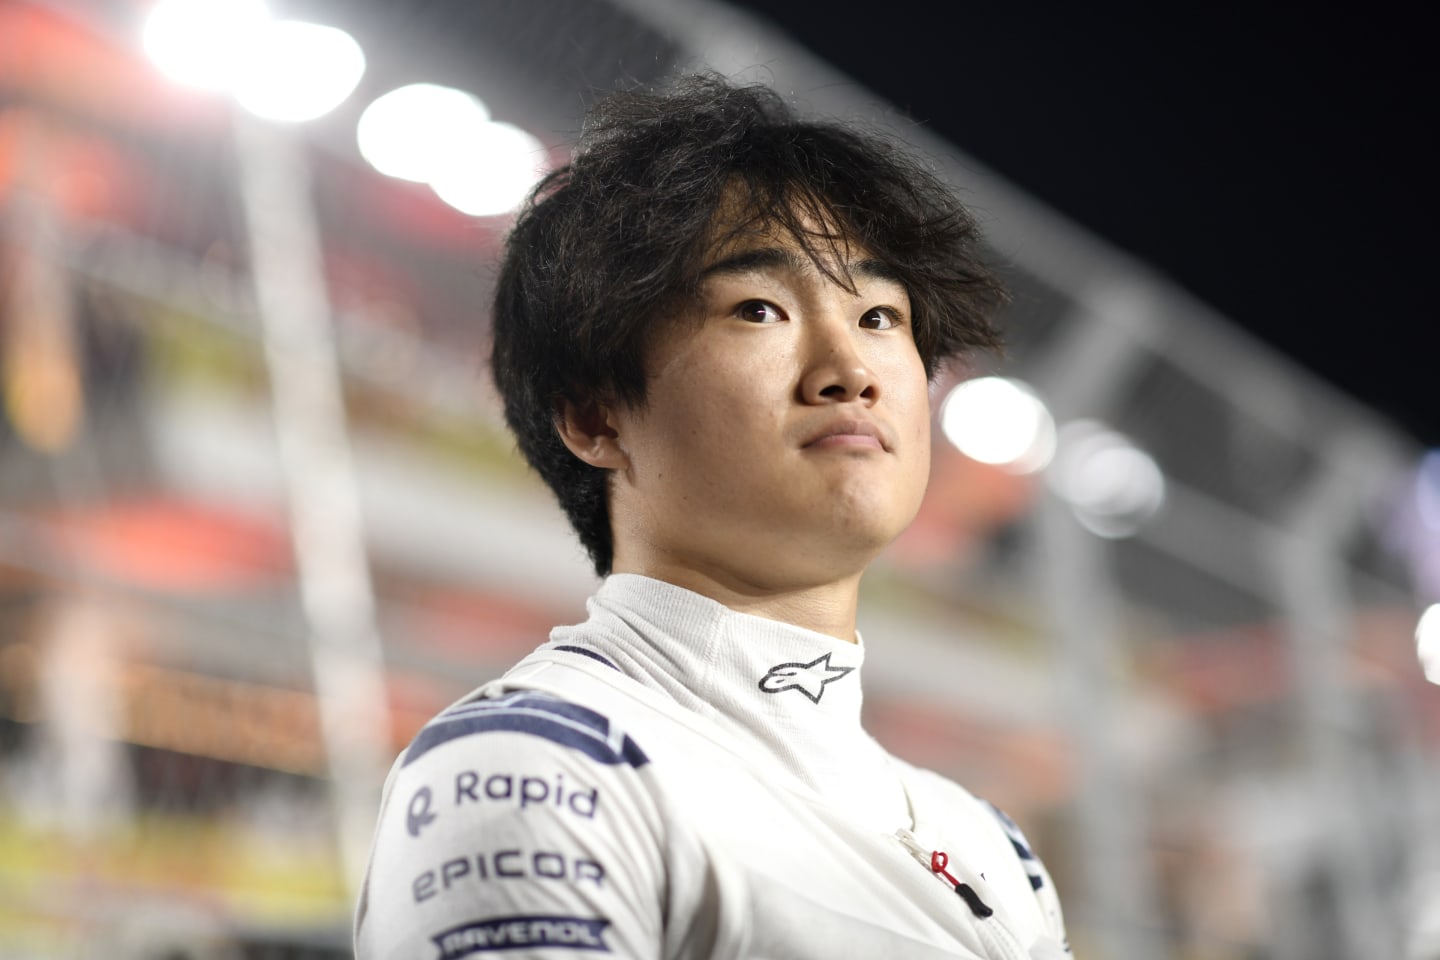 LUSAIL CITY, QATAR - OCTOBER 07: Yuki Tsunoda of Japan and Scuderia AlphaTauri looks on from the grid prior to the Sprint ahead of the F1 Grand Prix of Qatar at Lusail International Circuit on October 07, 2023 in Lusail City, Qatar. (Photo by Rudy Carezzevoli/Getty Images)